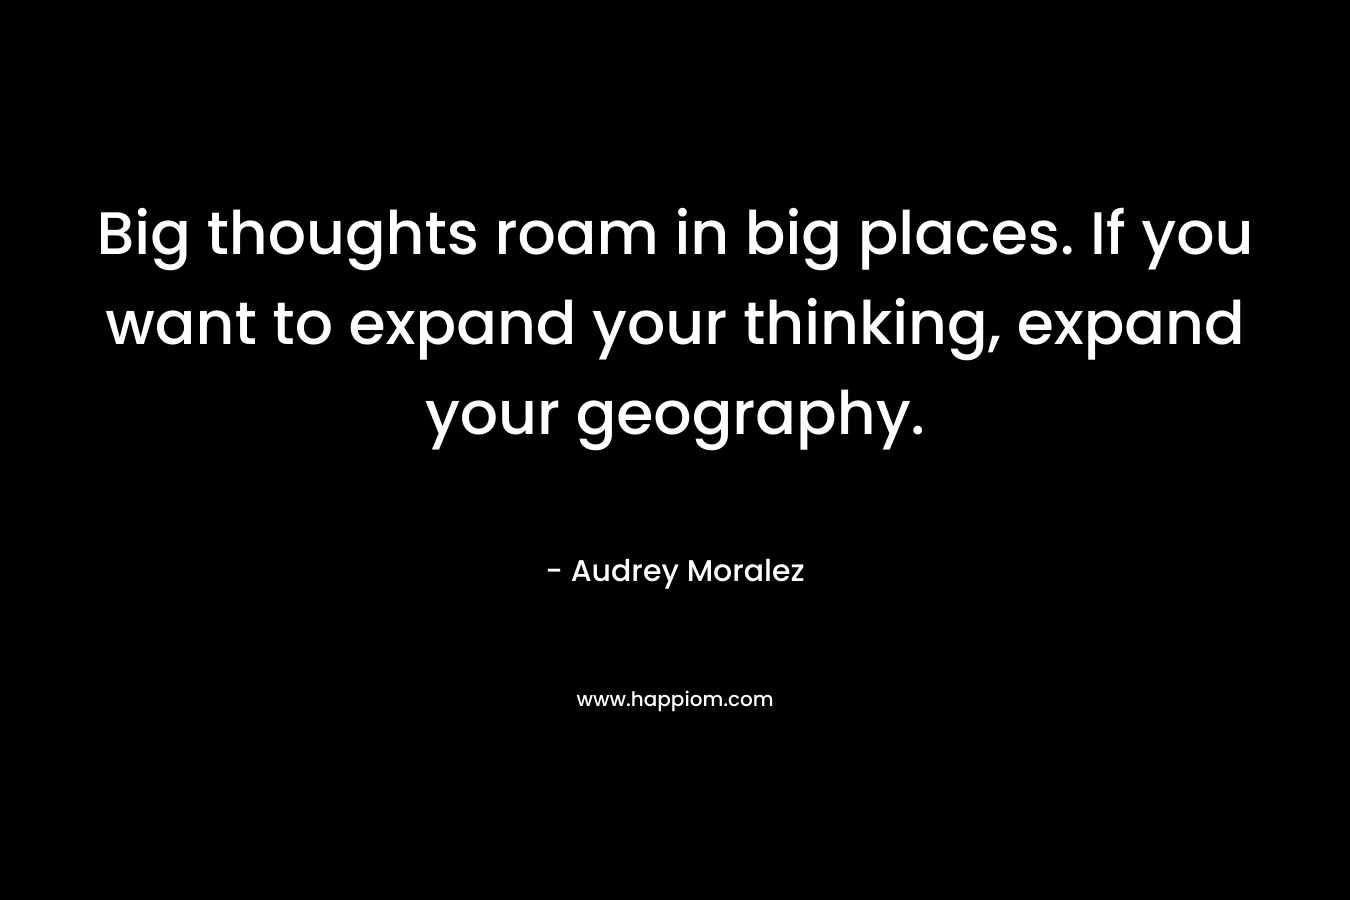 Big thoughts roam in big places. If you want to expand your thinking, expand your geography.